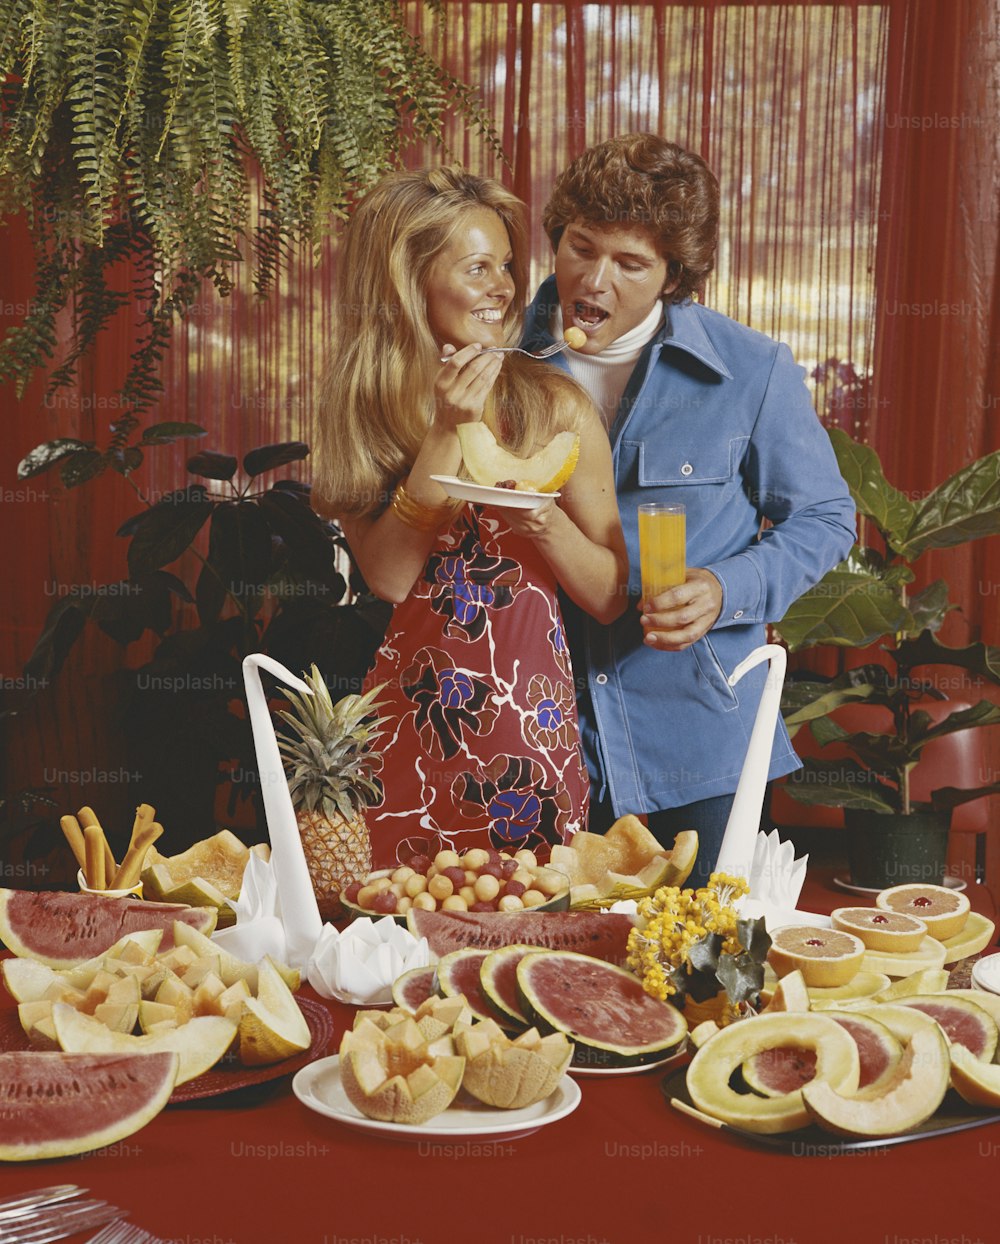 a man and woman standing next to a table full of food